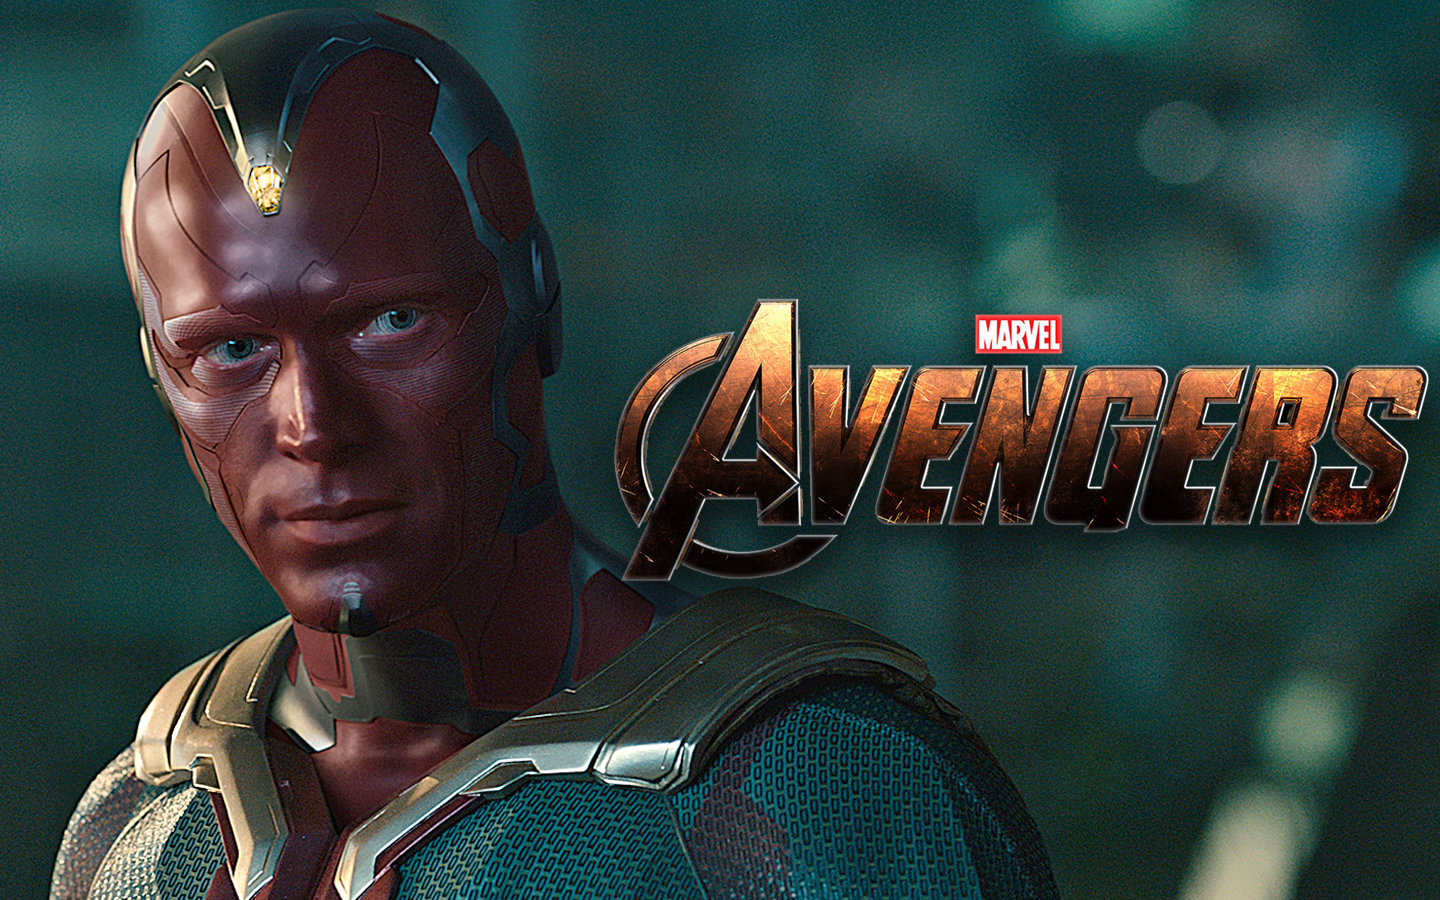 Paul Bettany Returning As Vision in Avengers 4